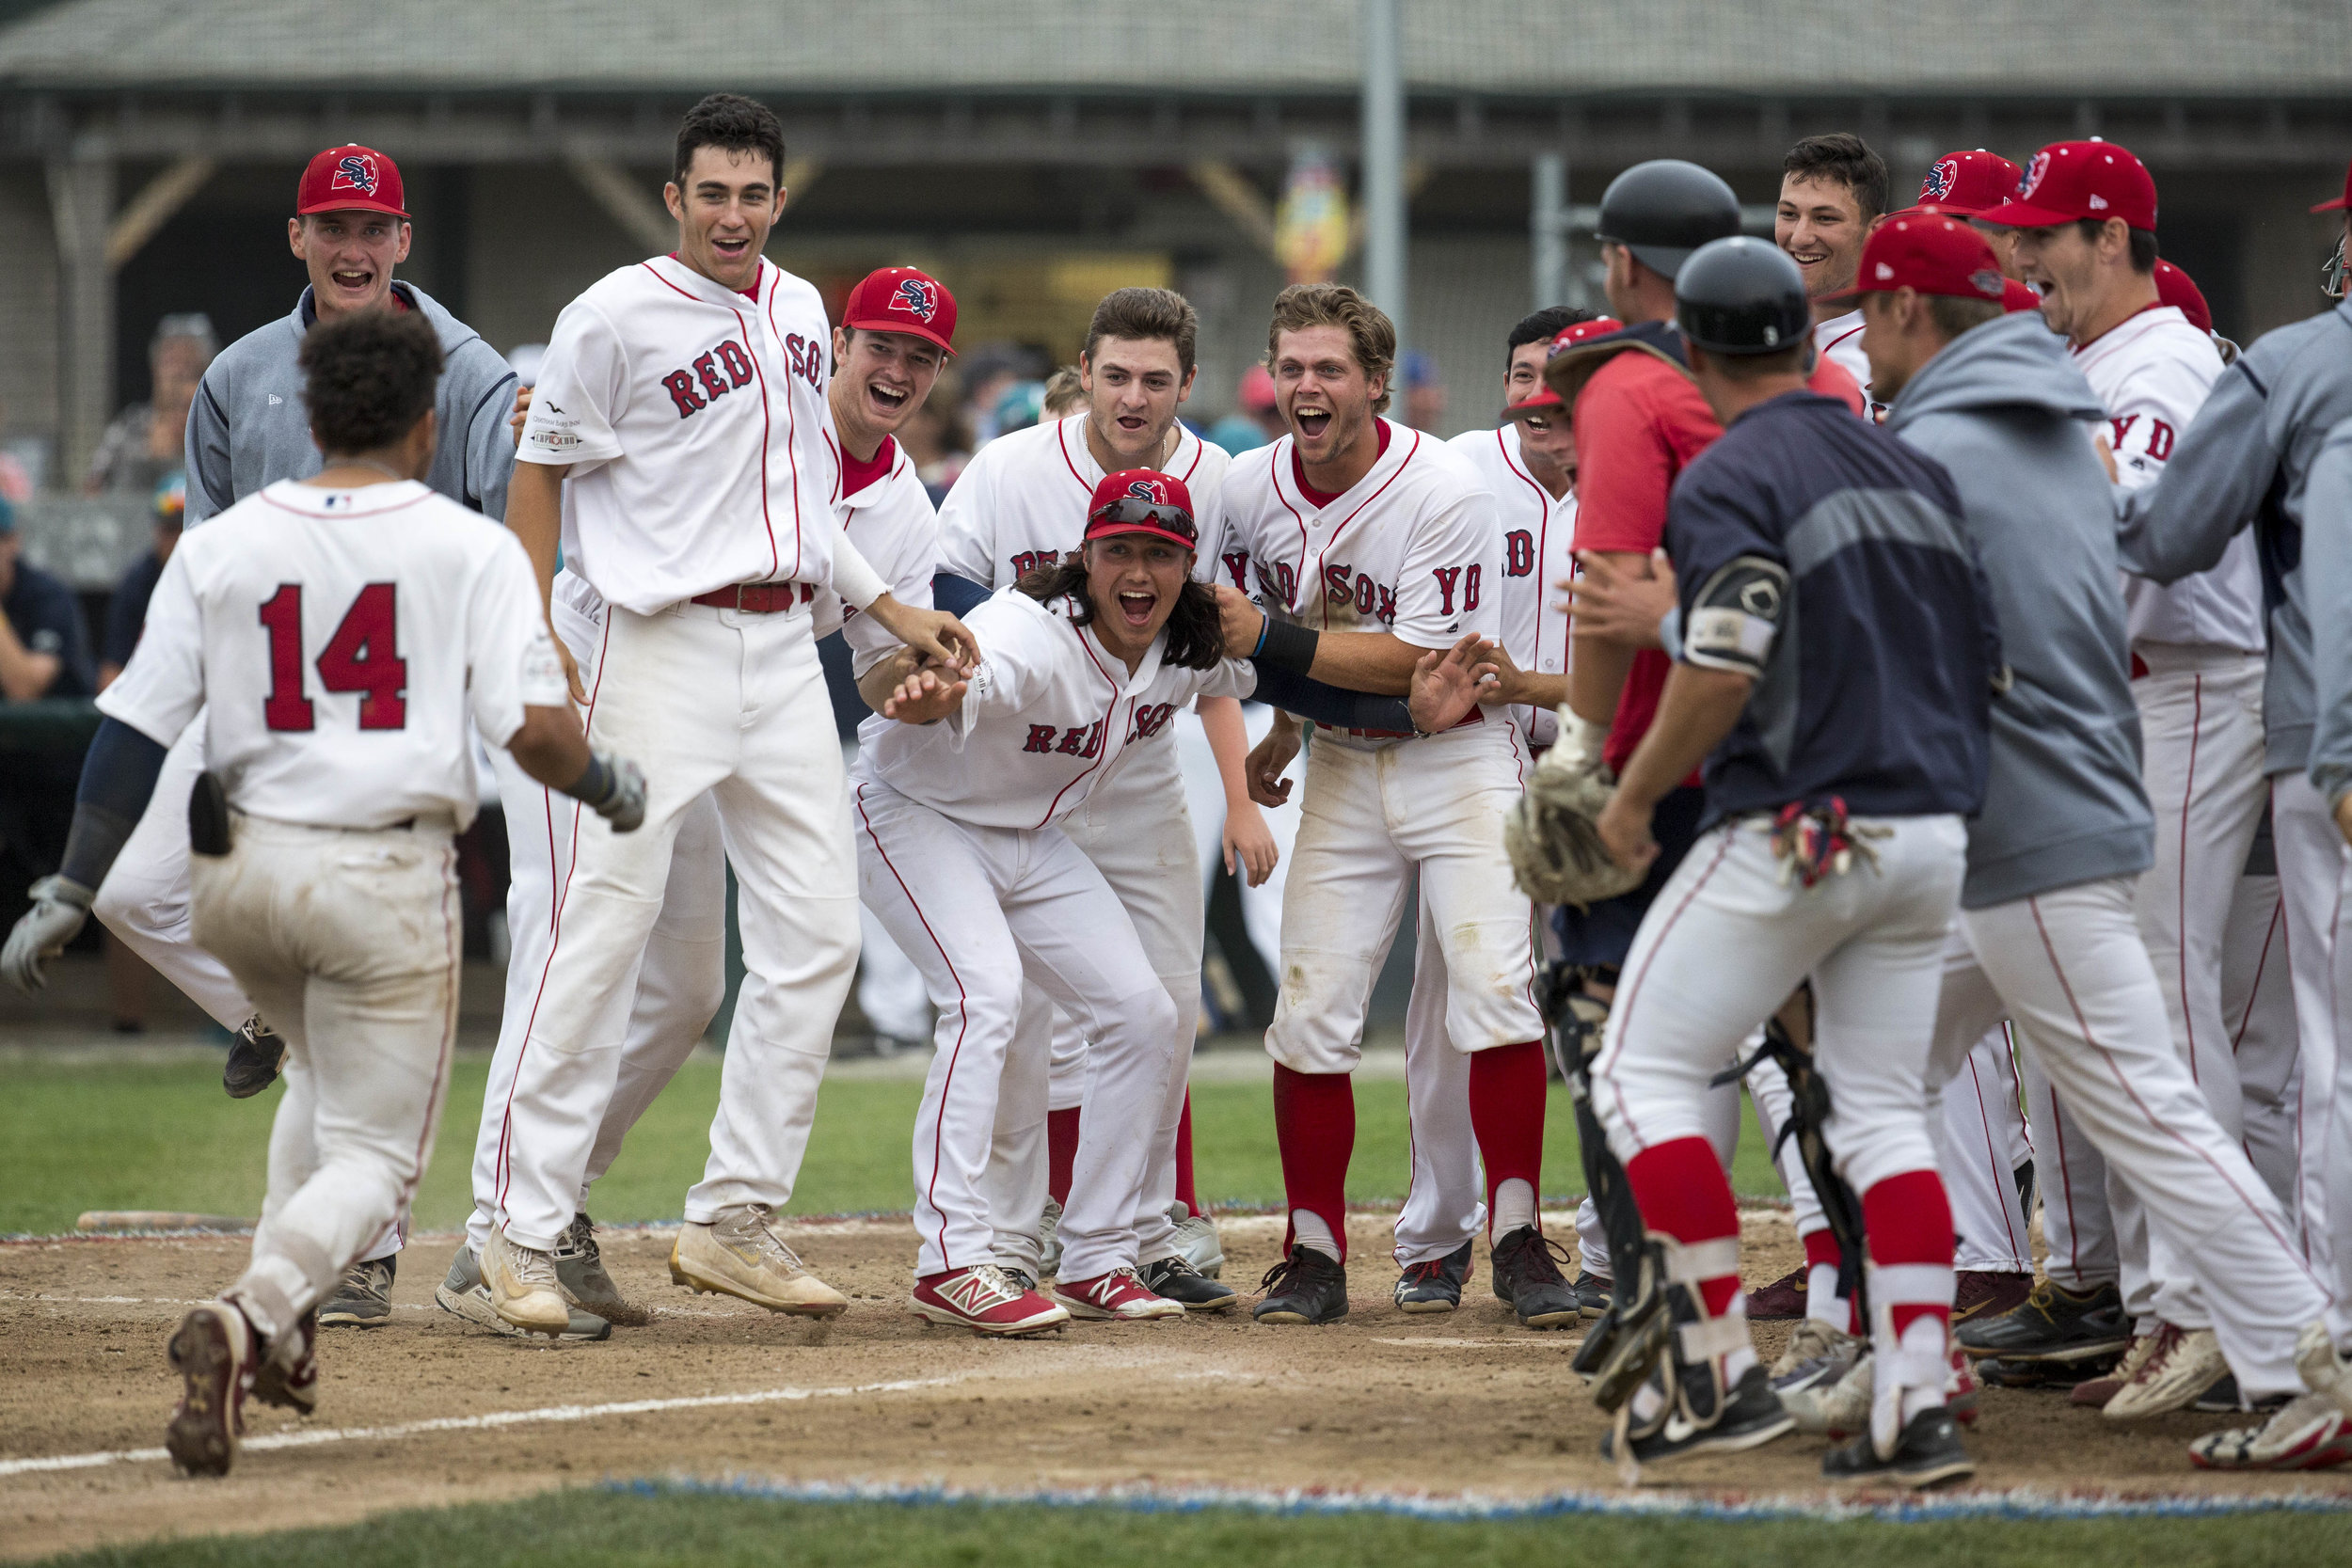  The YD Red Sox cheer as Carlos Cortes runs home after hitting a home run to win the game against the Brewster Whitecaps during the first round of the Cape League Playoffs on August 5, 2017. 